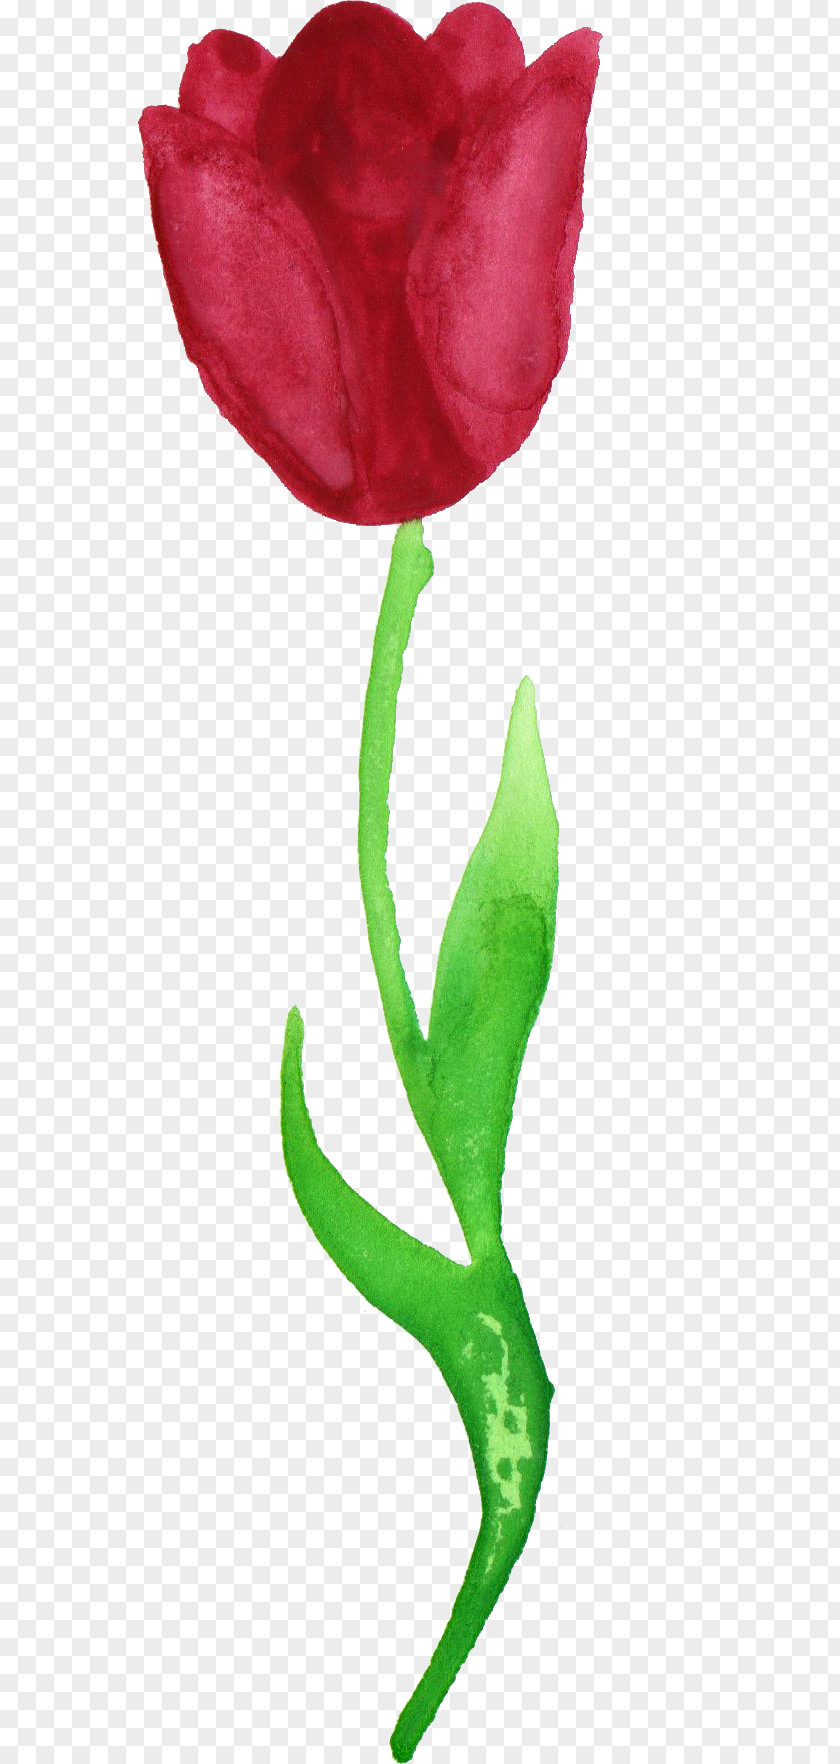 Tulips Tulip Cut Flowers Watercolor Painting PNG